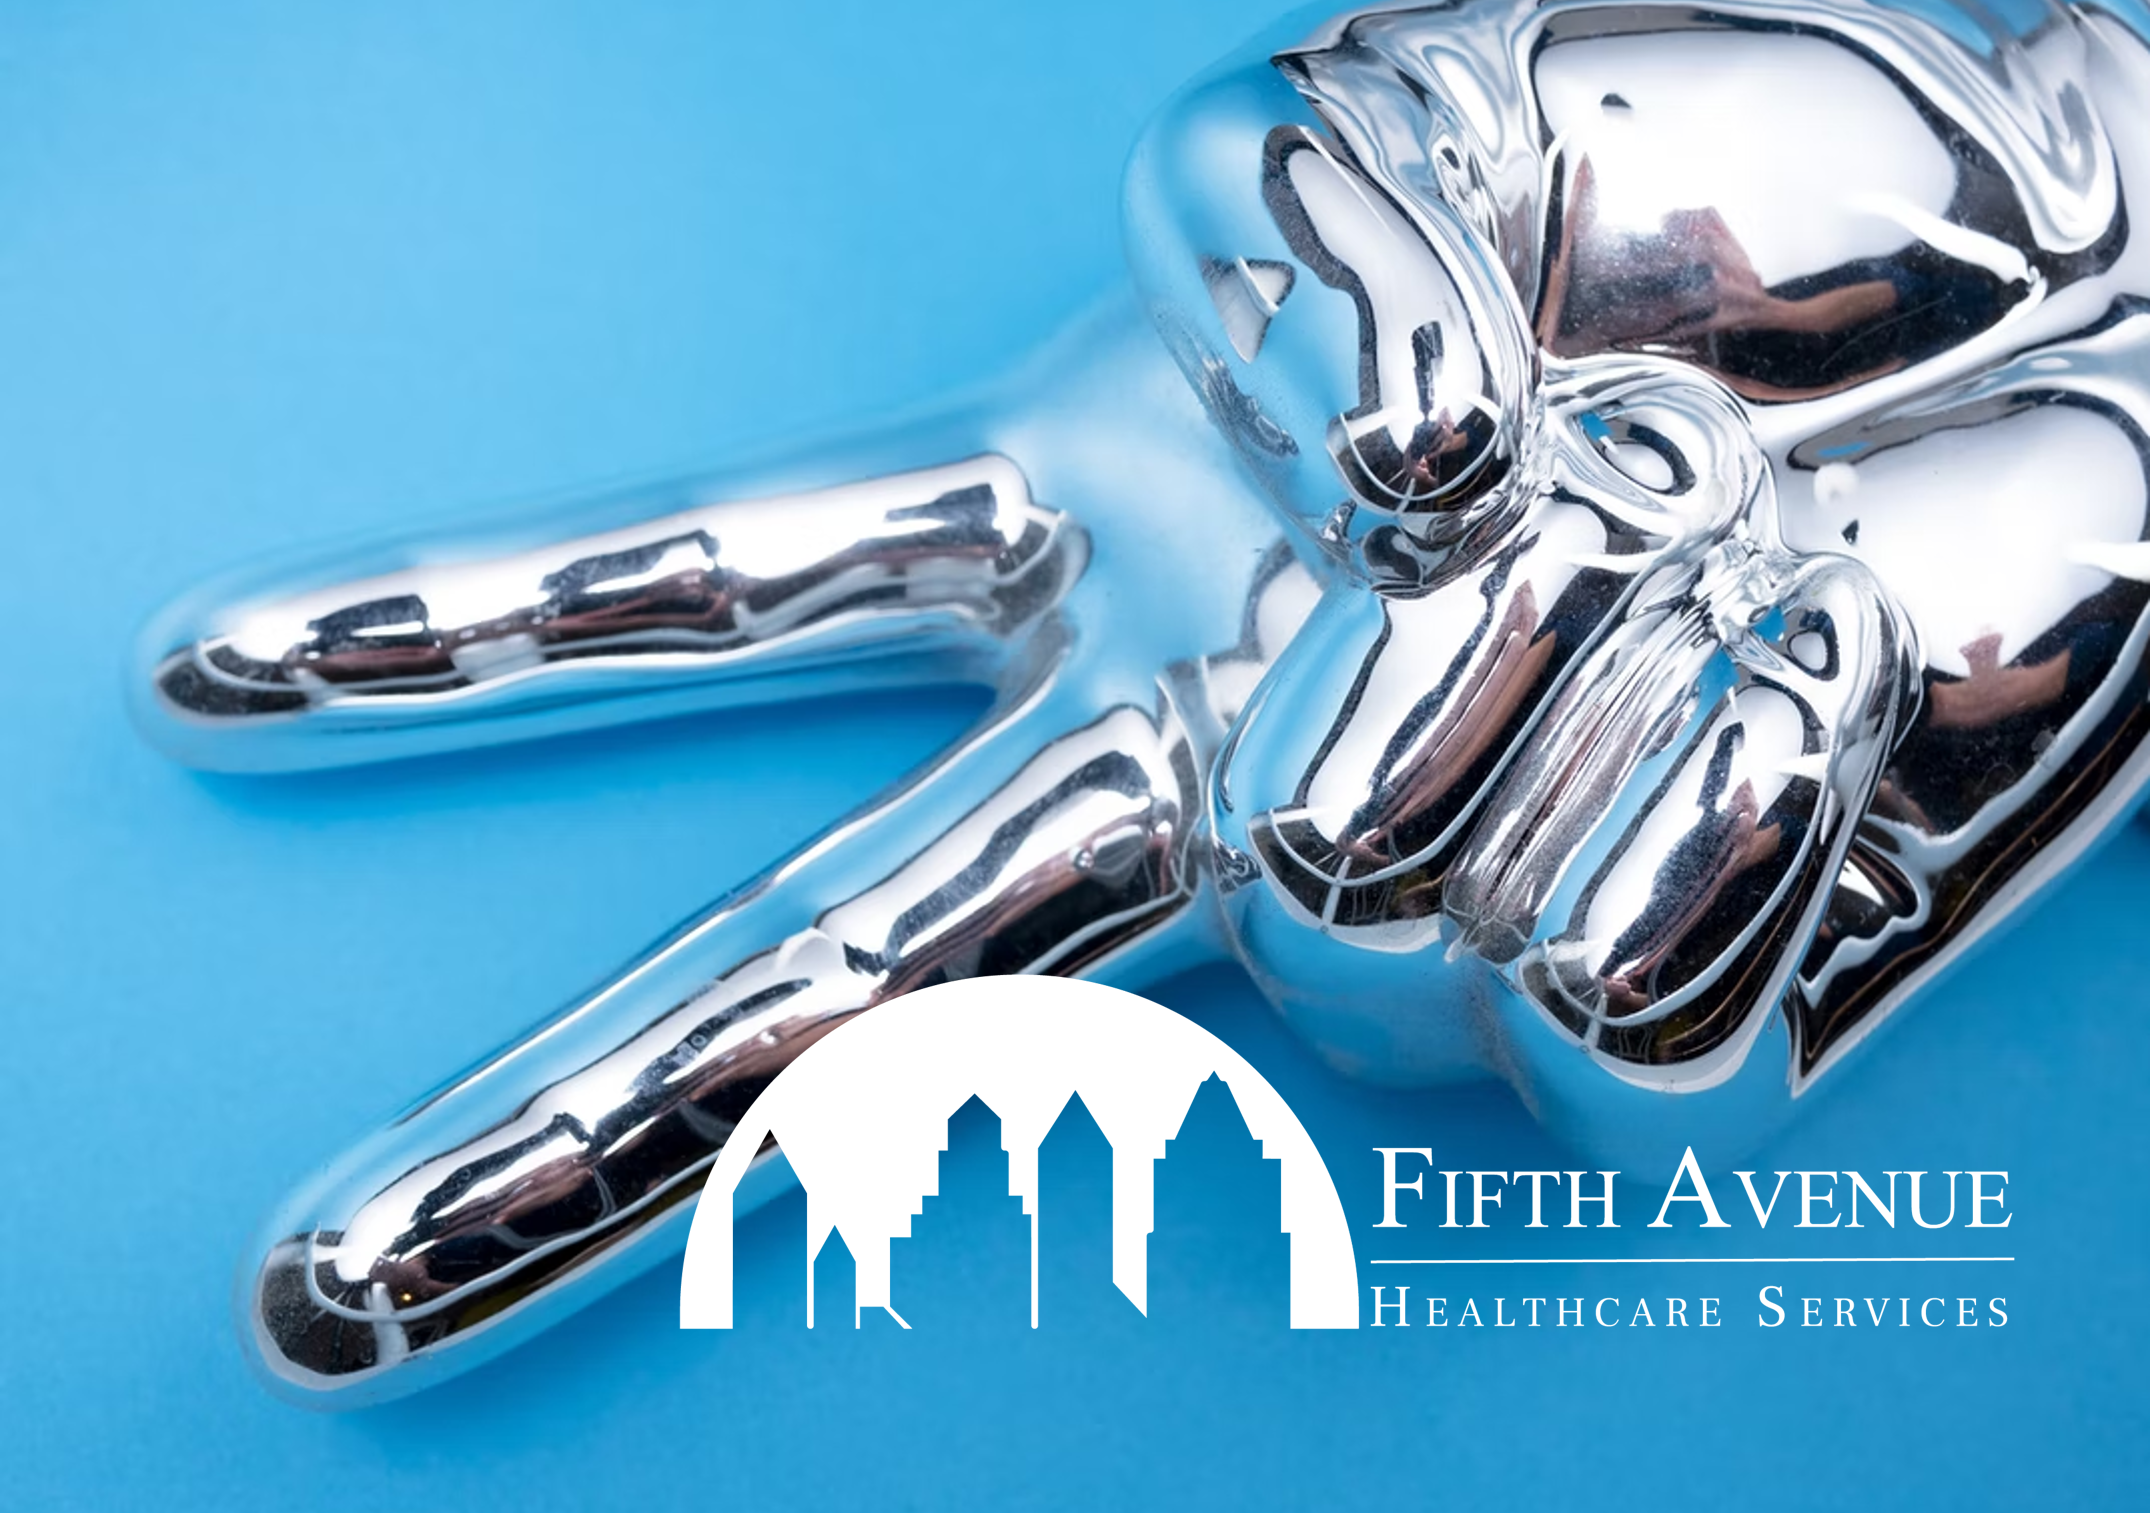 Fifth Avenue Healthcare Services Credentialing Blog Wins Silver Award